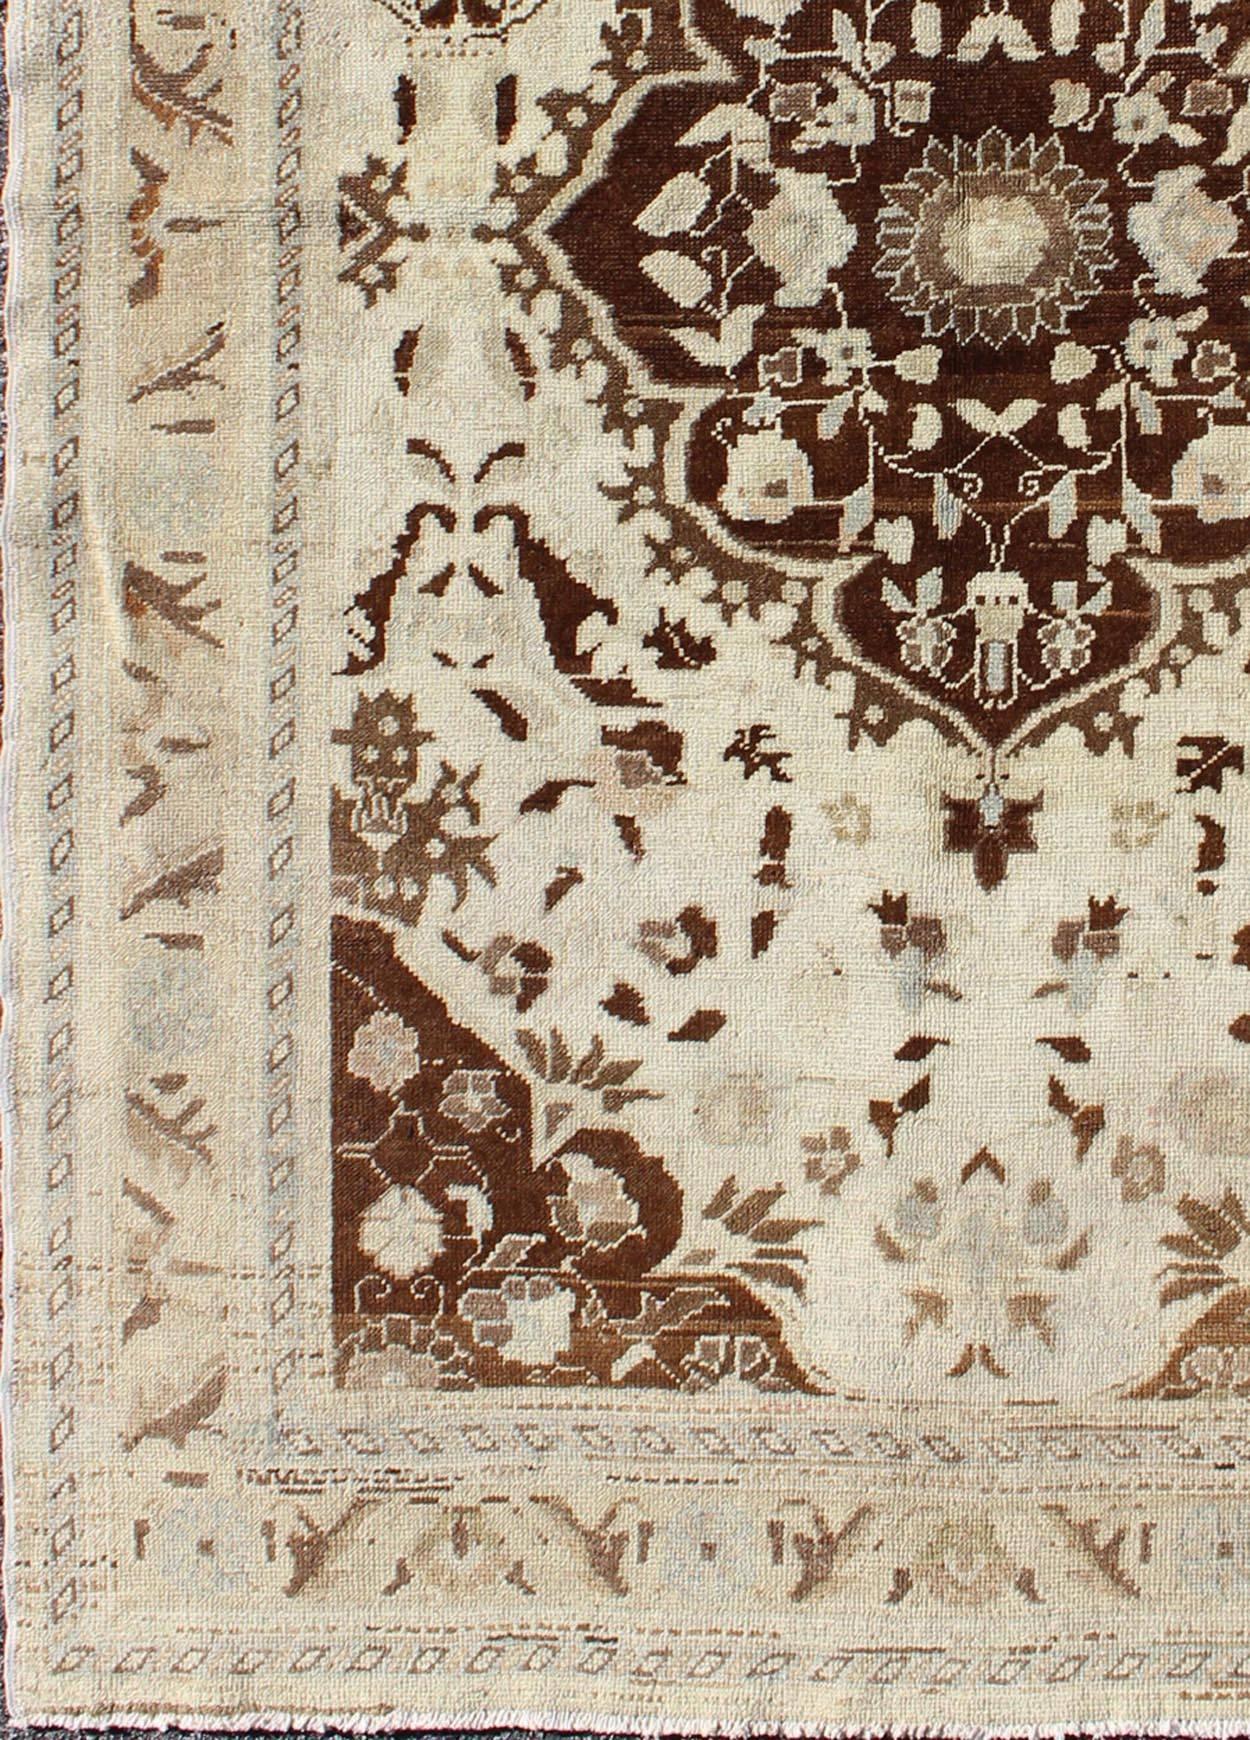 Turkish Oushak vintage rug with intricate floral medallion in brown and ivory, rug ayd-95077, country of origin / type: Turkey / Oushak, circa mid-20th century.

This vintage Turkish Oushak carpet (circa mid-20th century) features a central